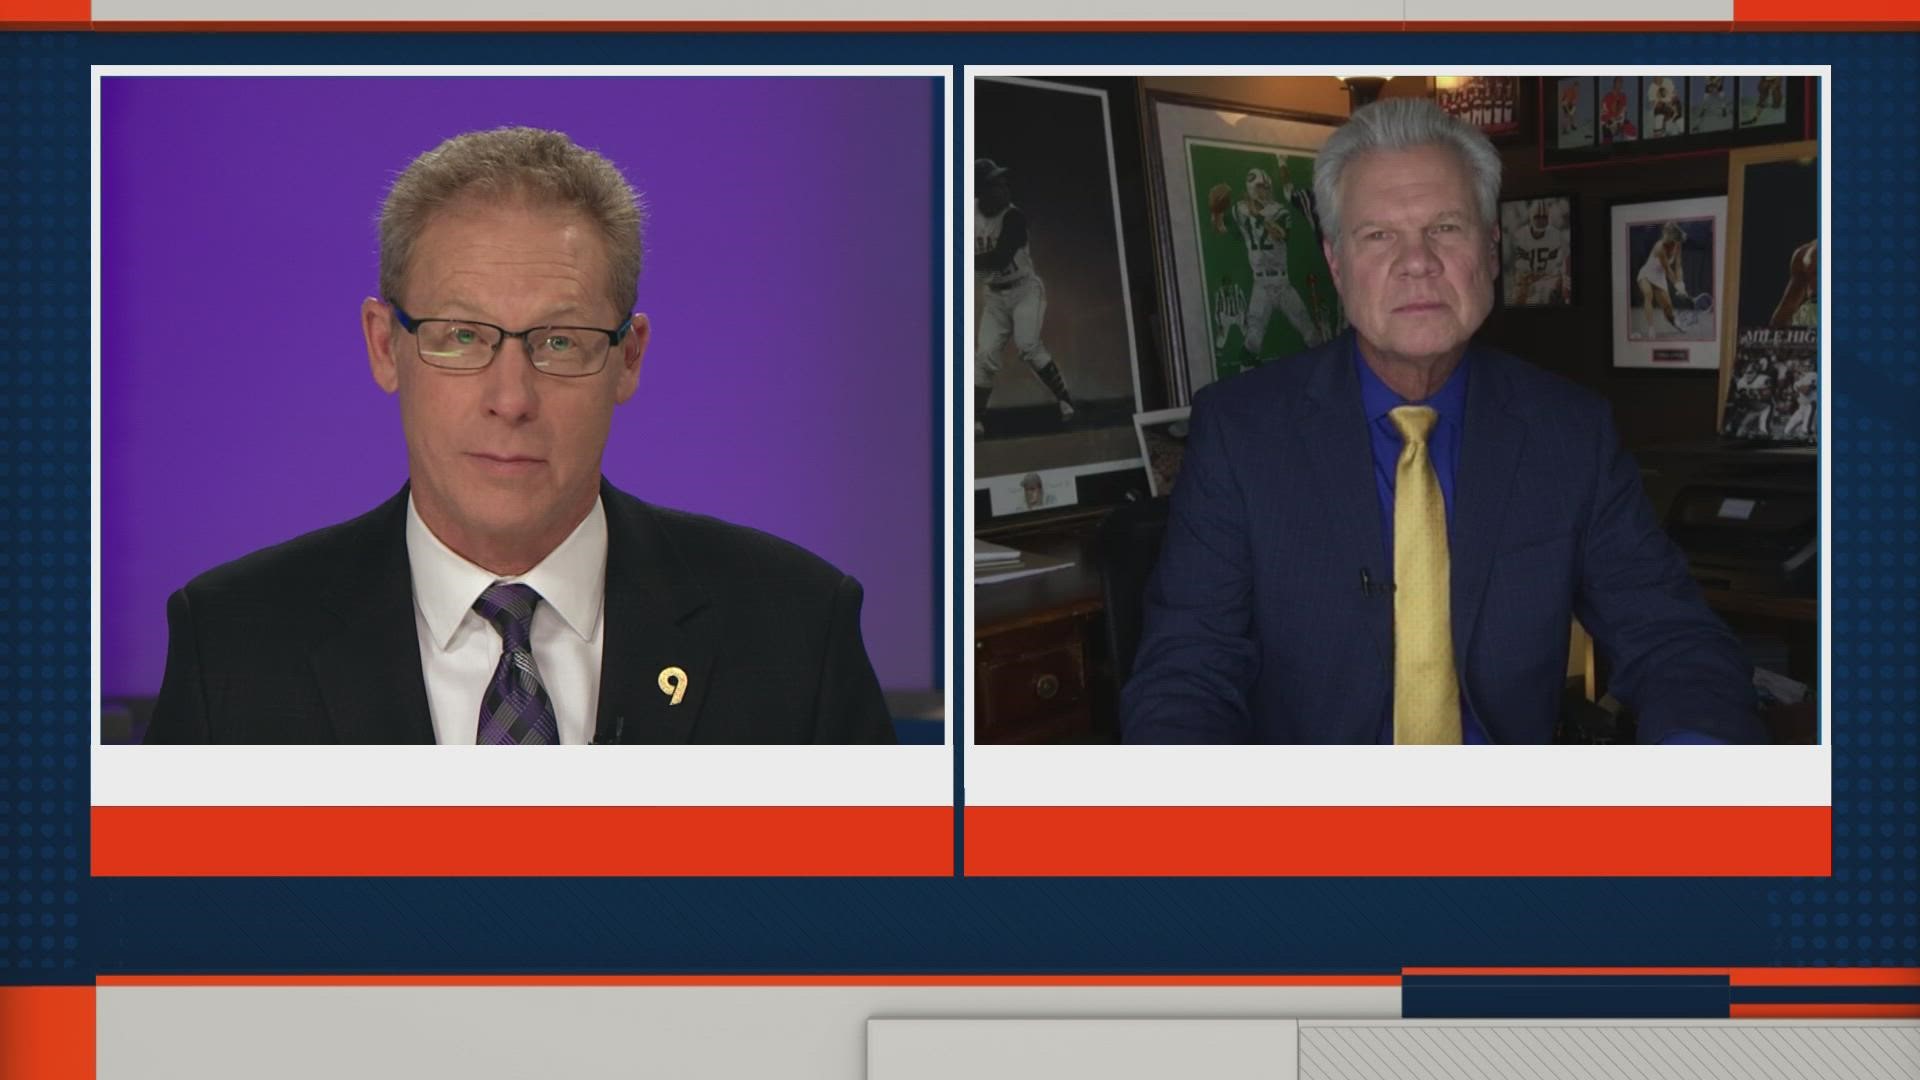 Mike Klis joined Rod Mackey on 9NEWS to talk about the Denver Broncos' new coach, quarterback and owner changes this offseason.